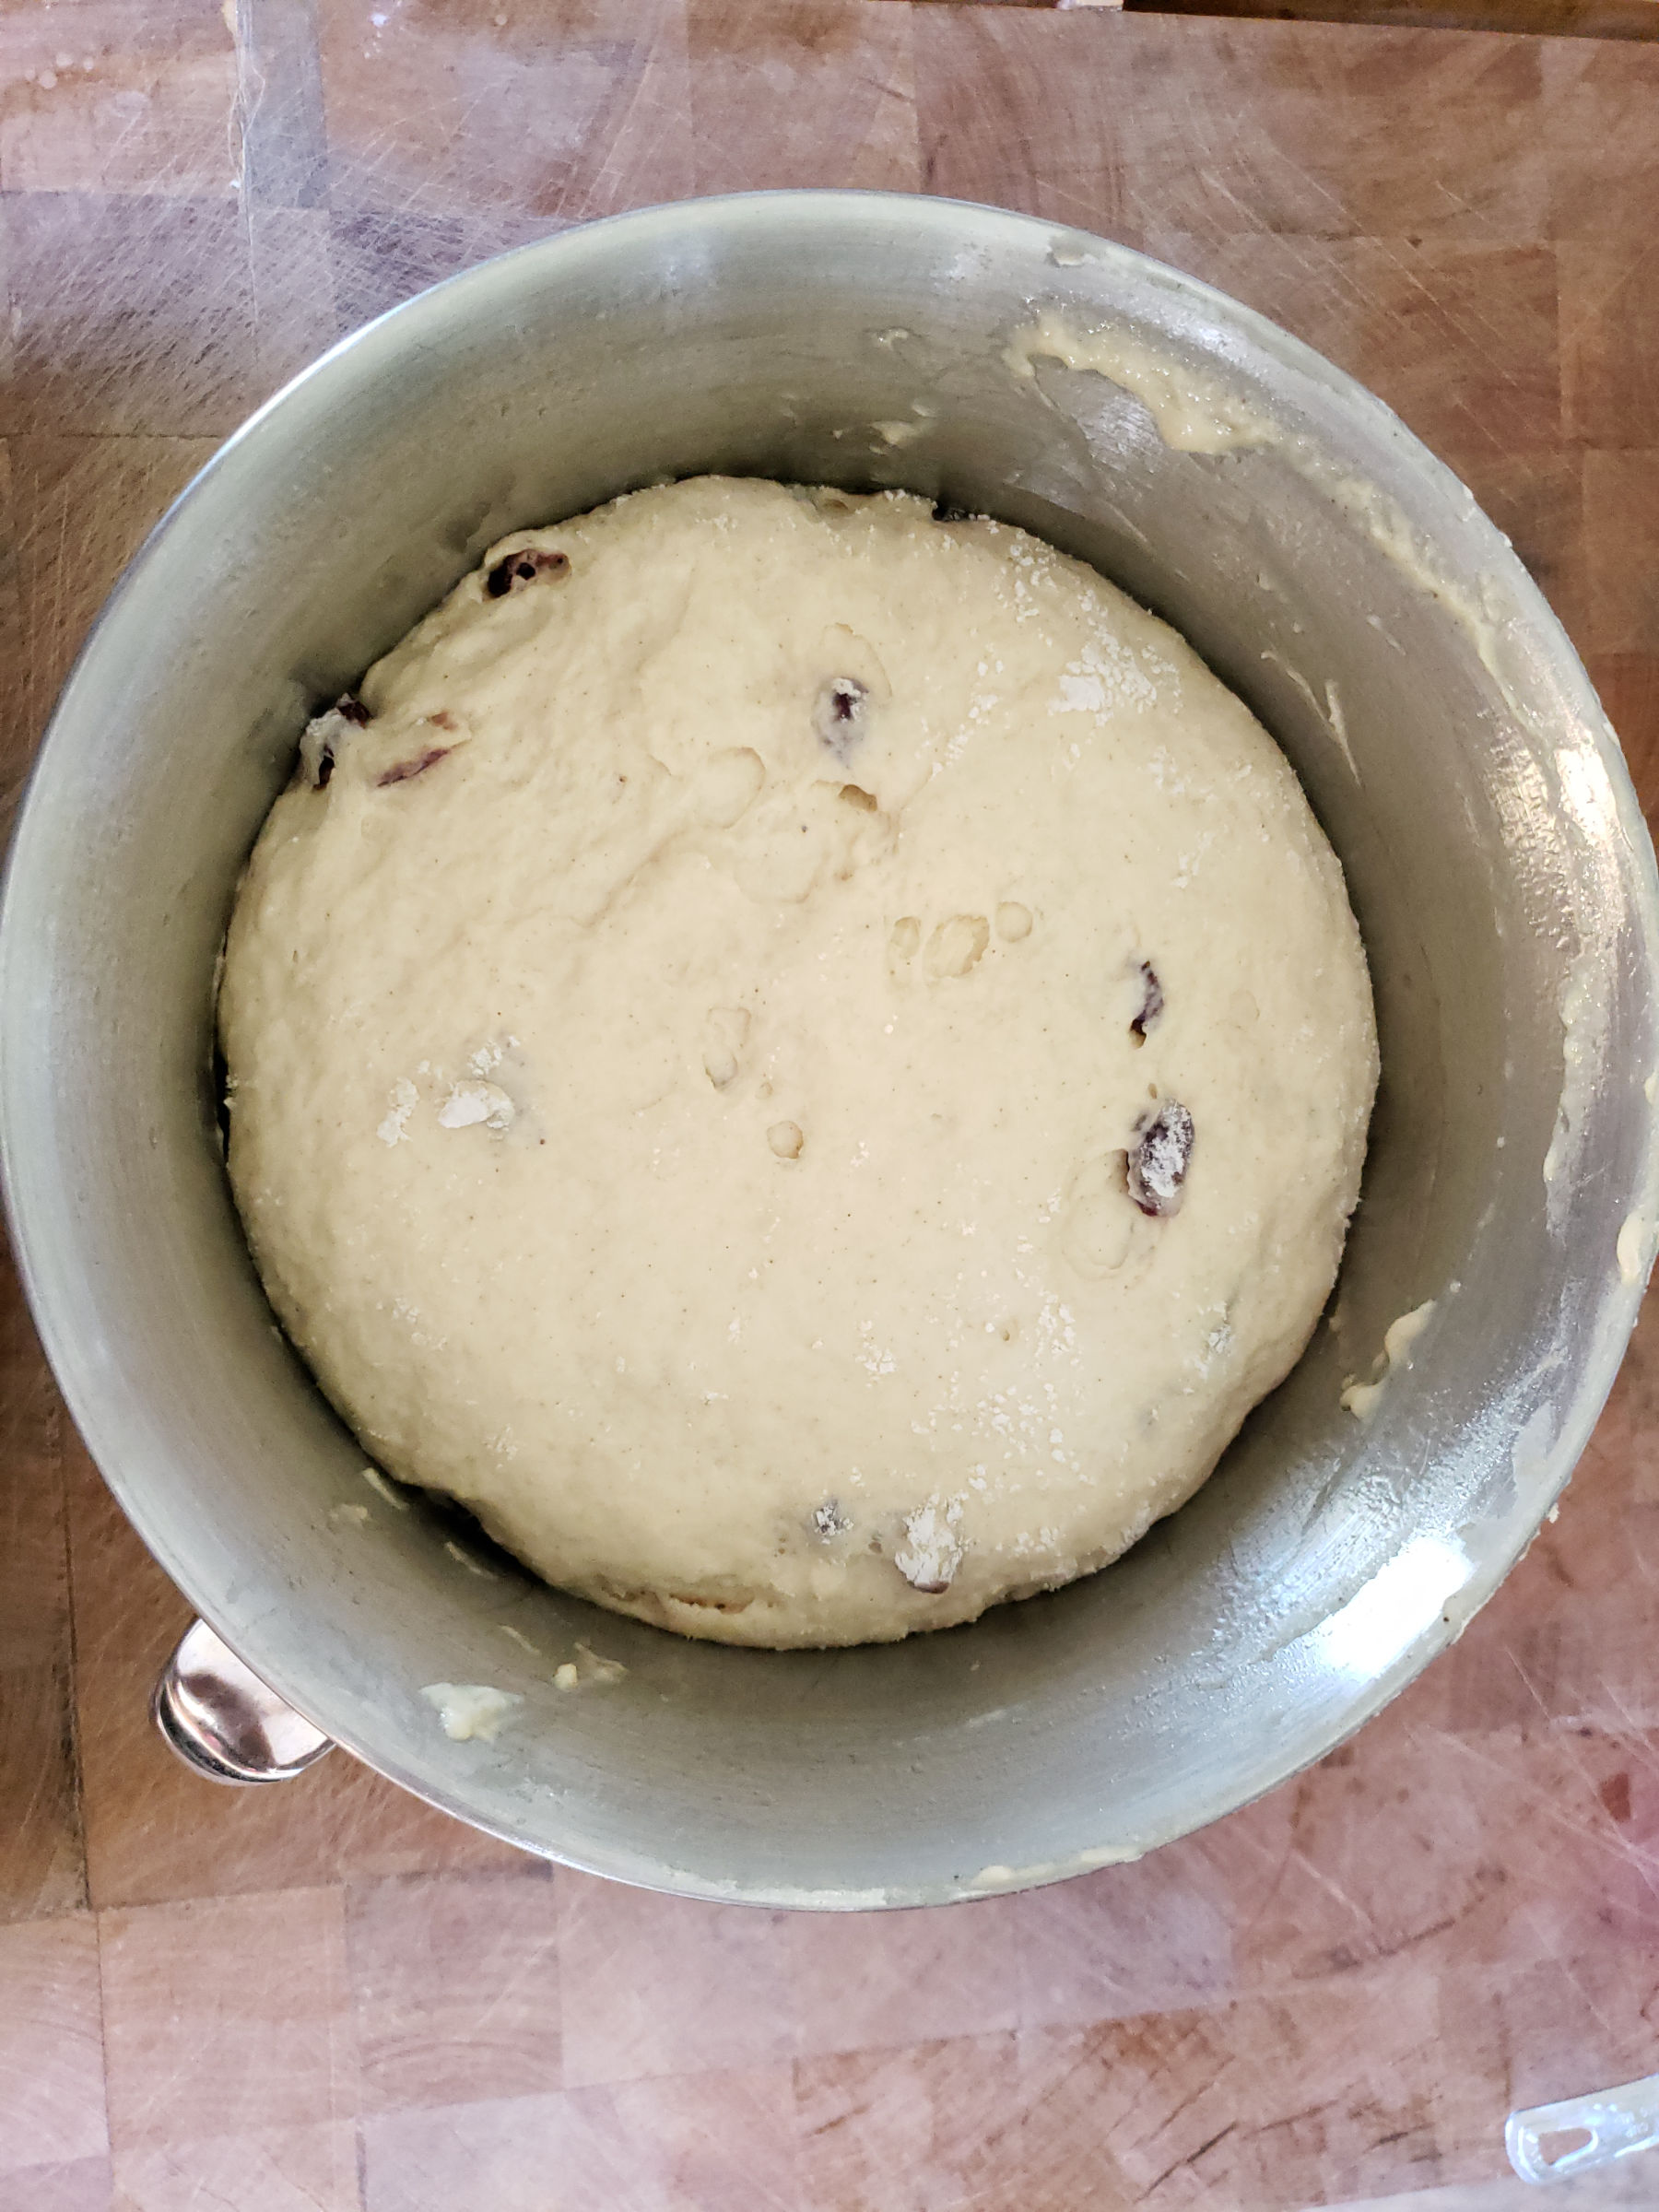 Hot cross buns dough risen and ready to shape into rounds.